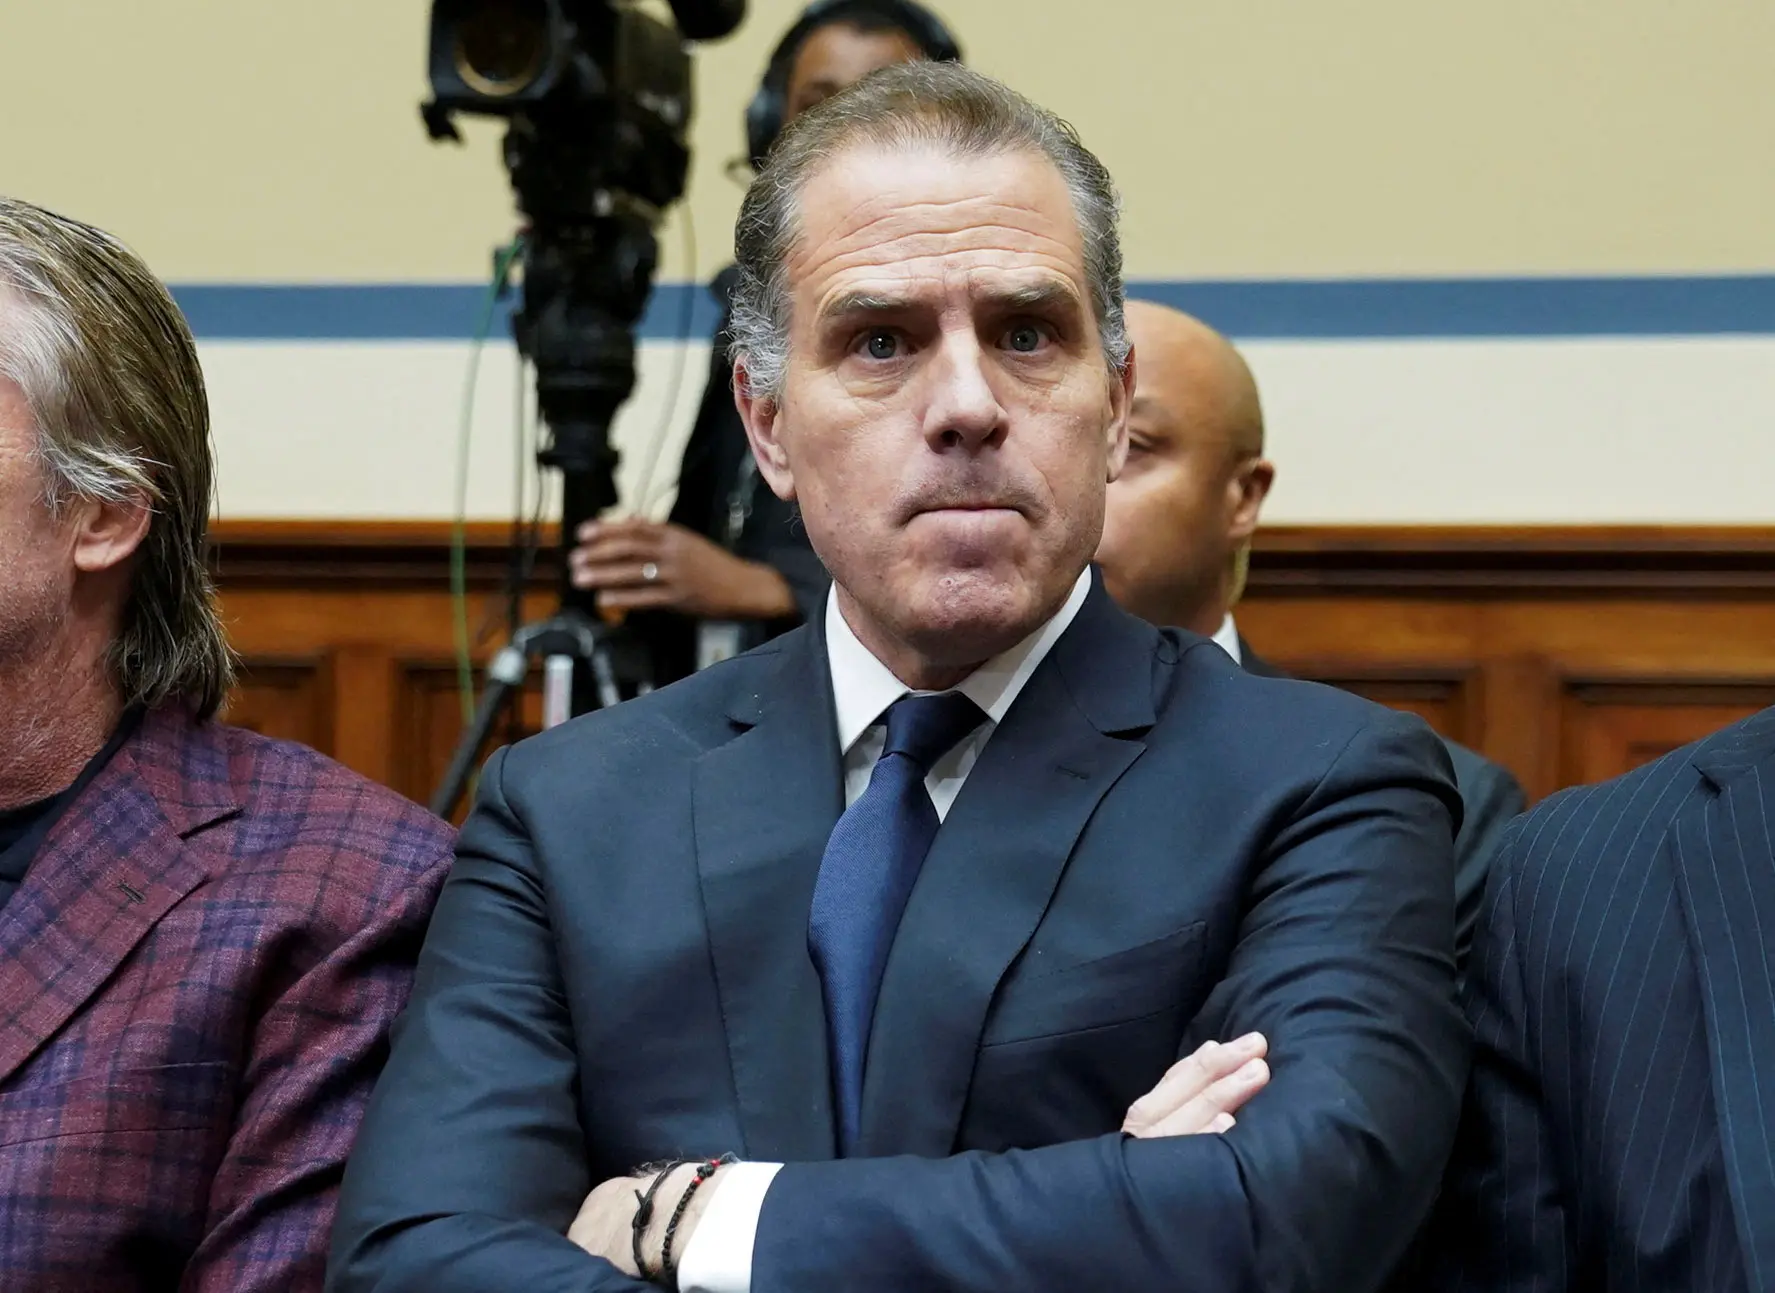 Is Hunter Biden’s Presence at White House Events a Political Misstep?